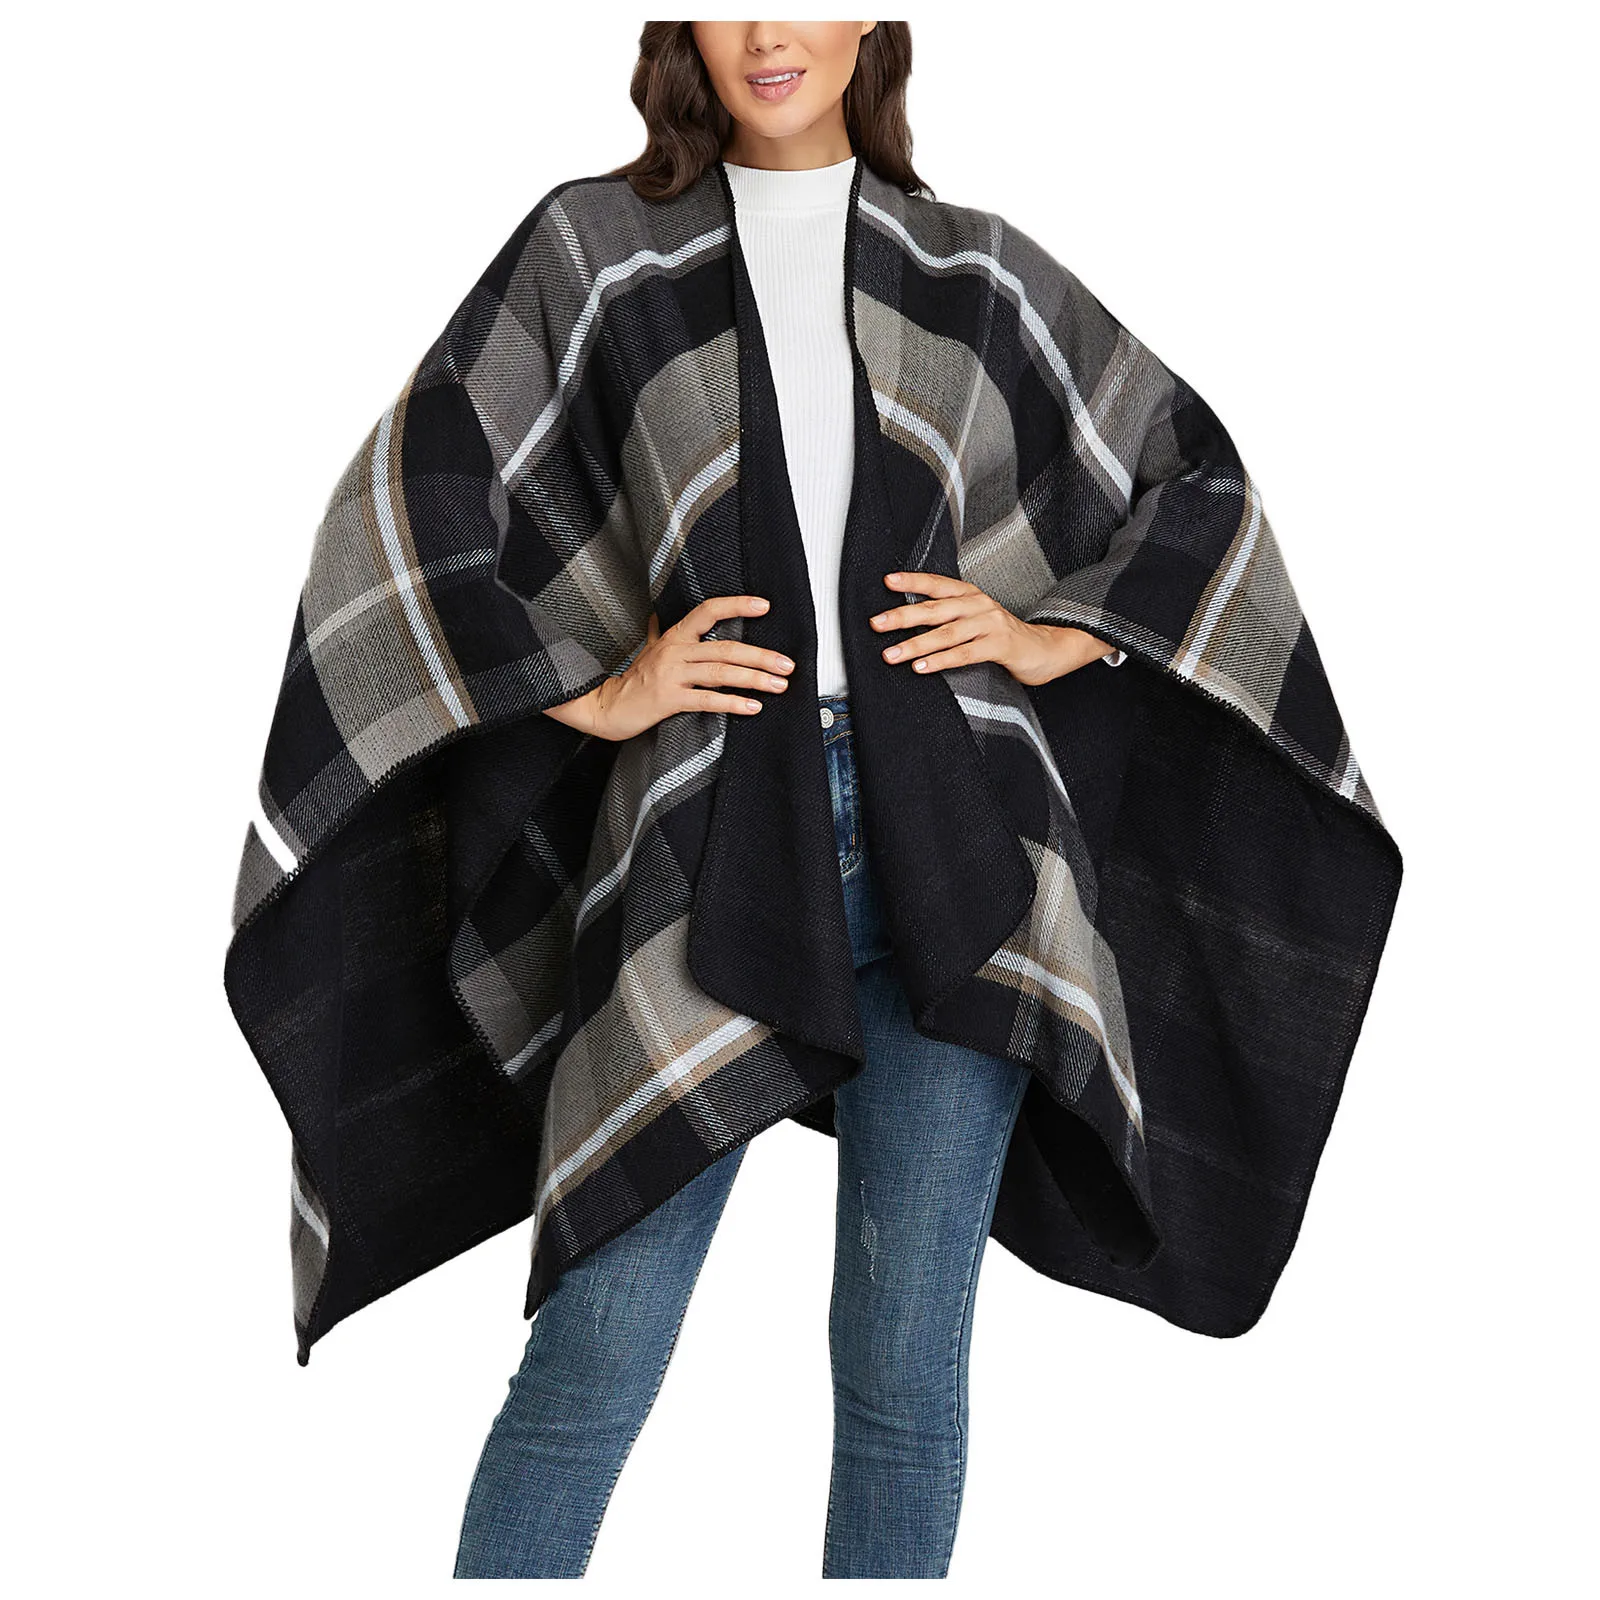 Women's Elegant Shawl Wrap Open Front Plaid Print Knitted Winter Thick Super Soft Cardigans Sweater Ruana Cape Jacket